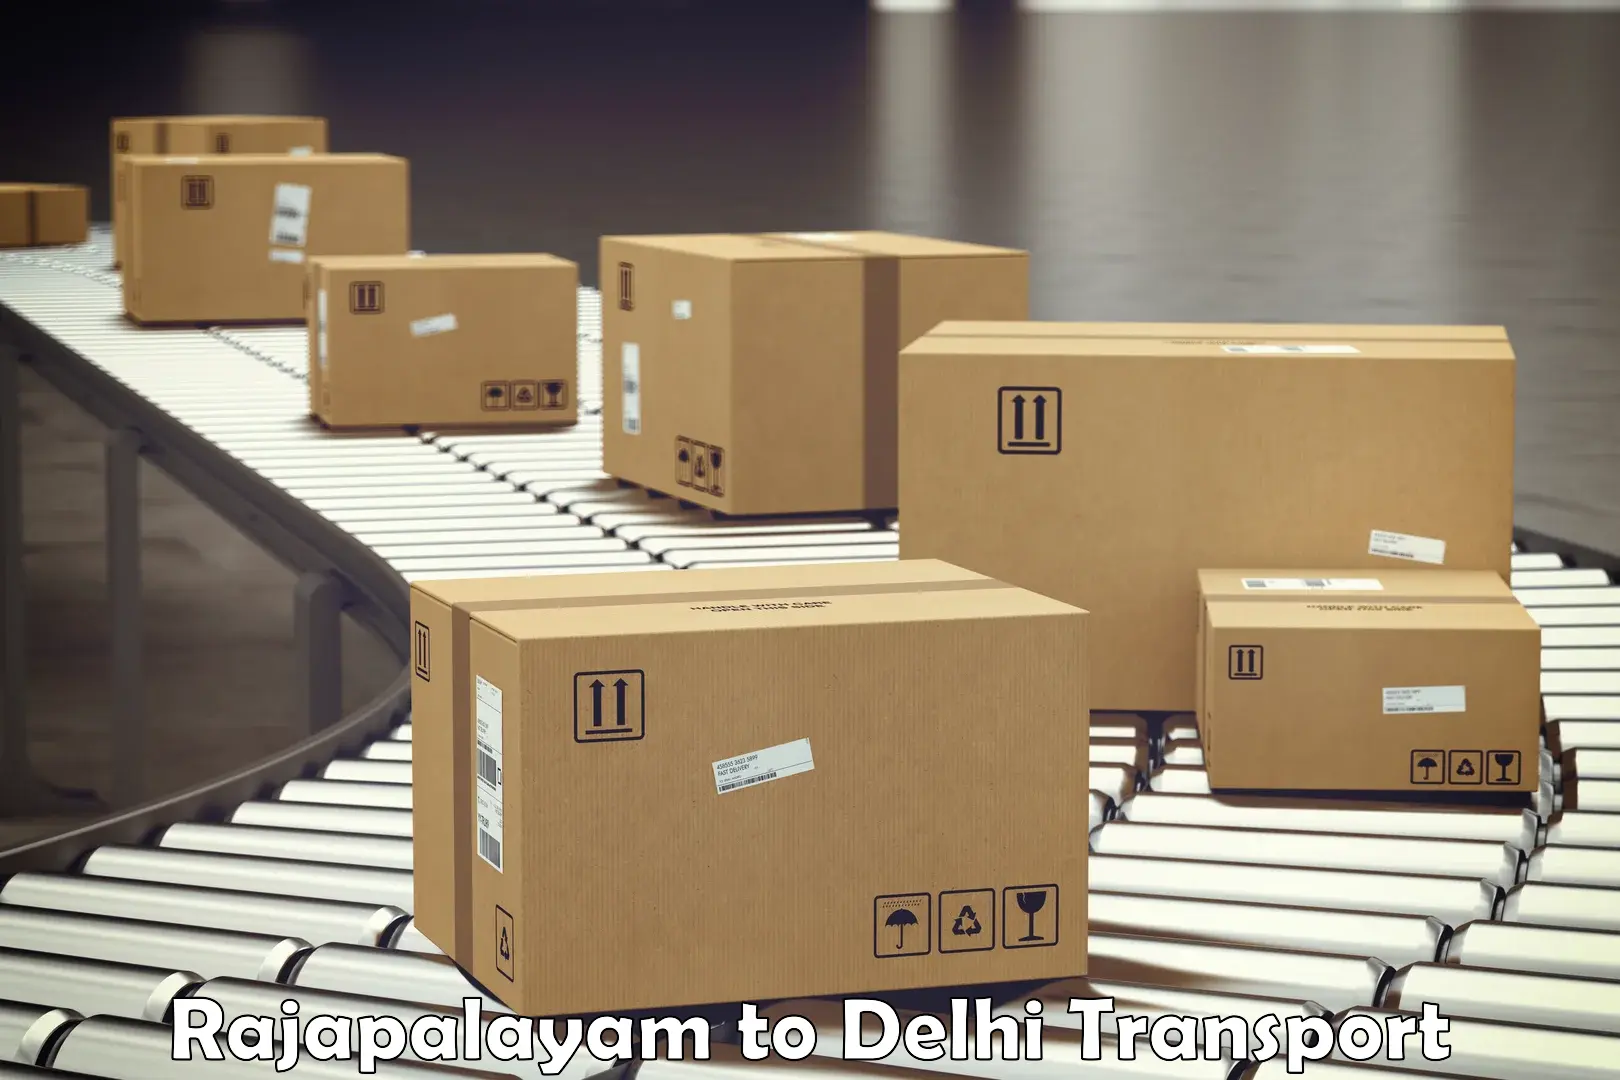 Daily parcel service transport Rajapalayam to IIT Delhi